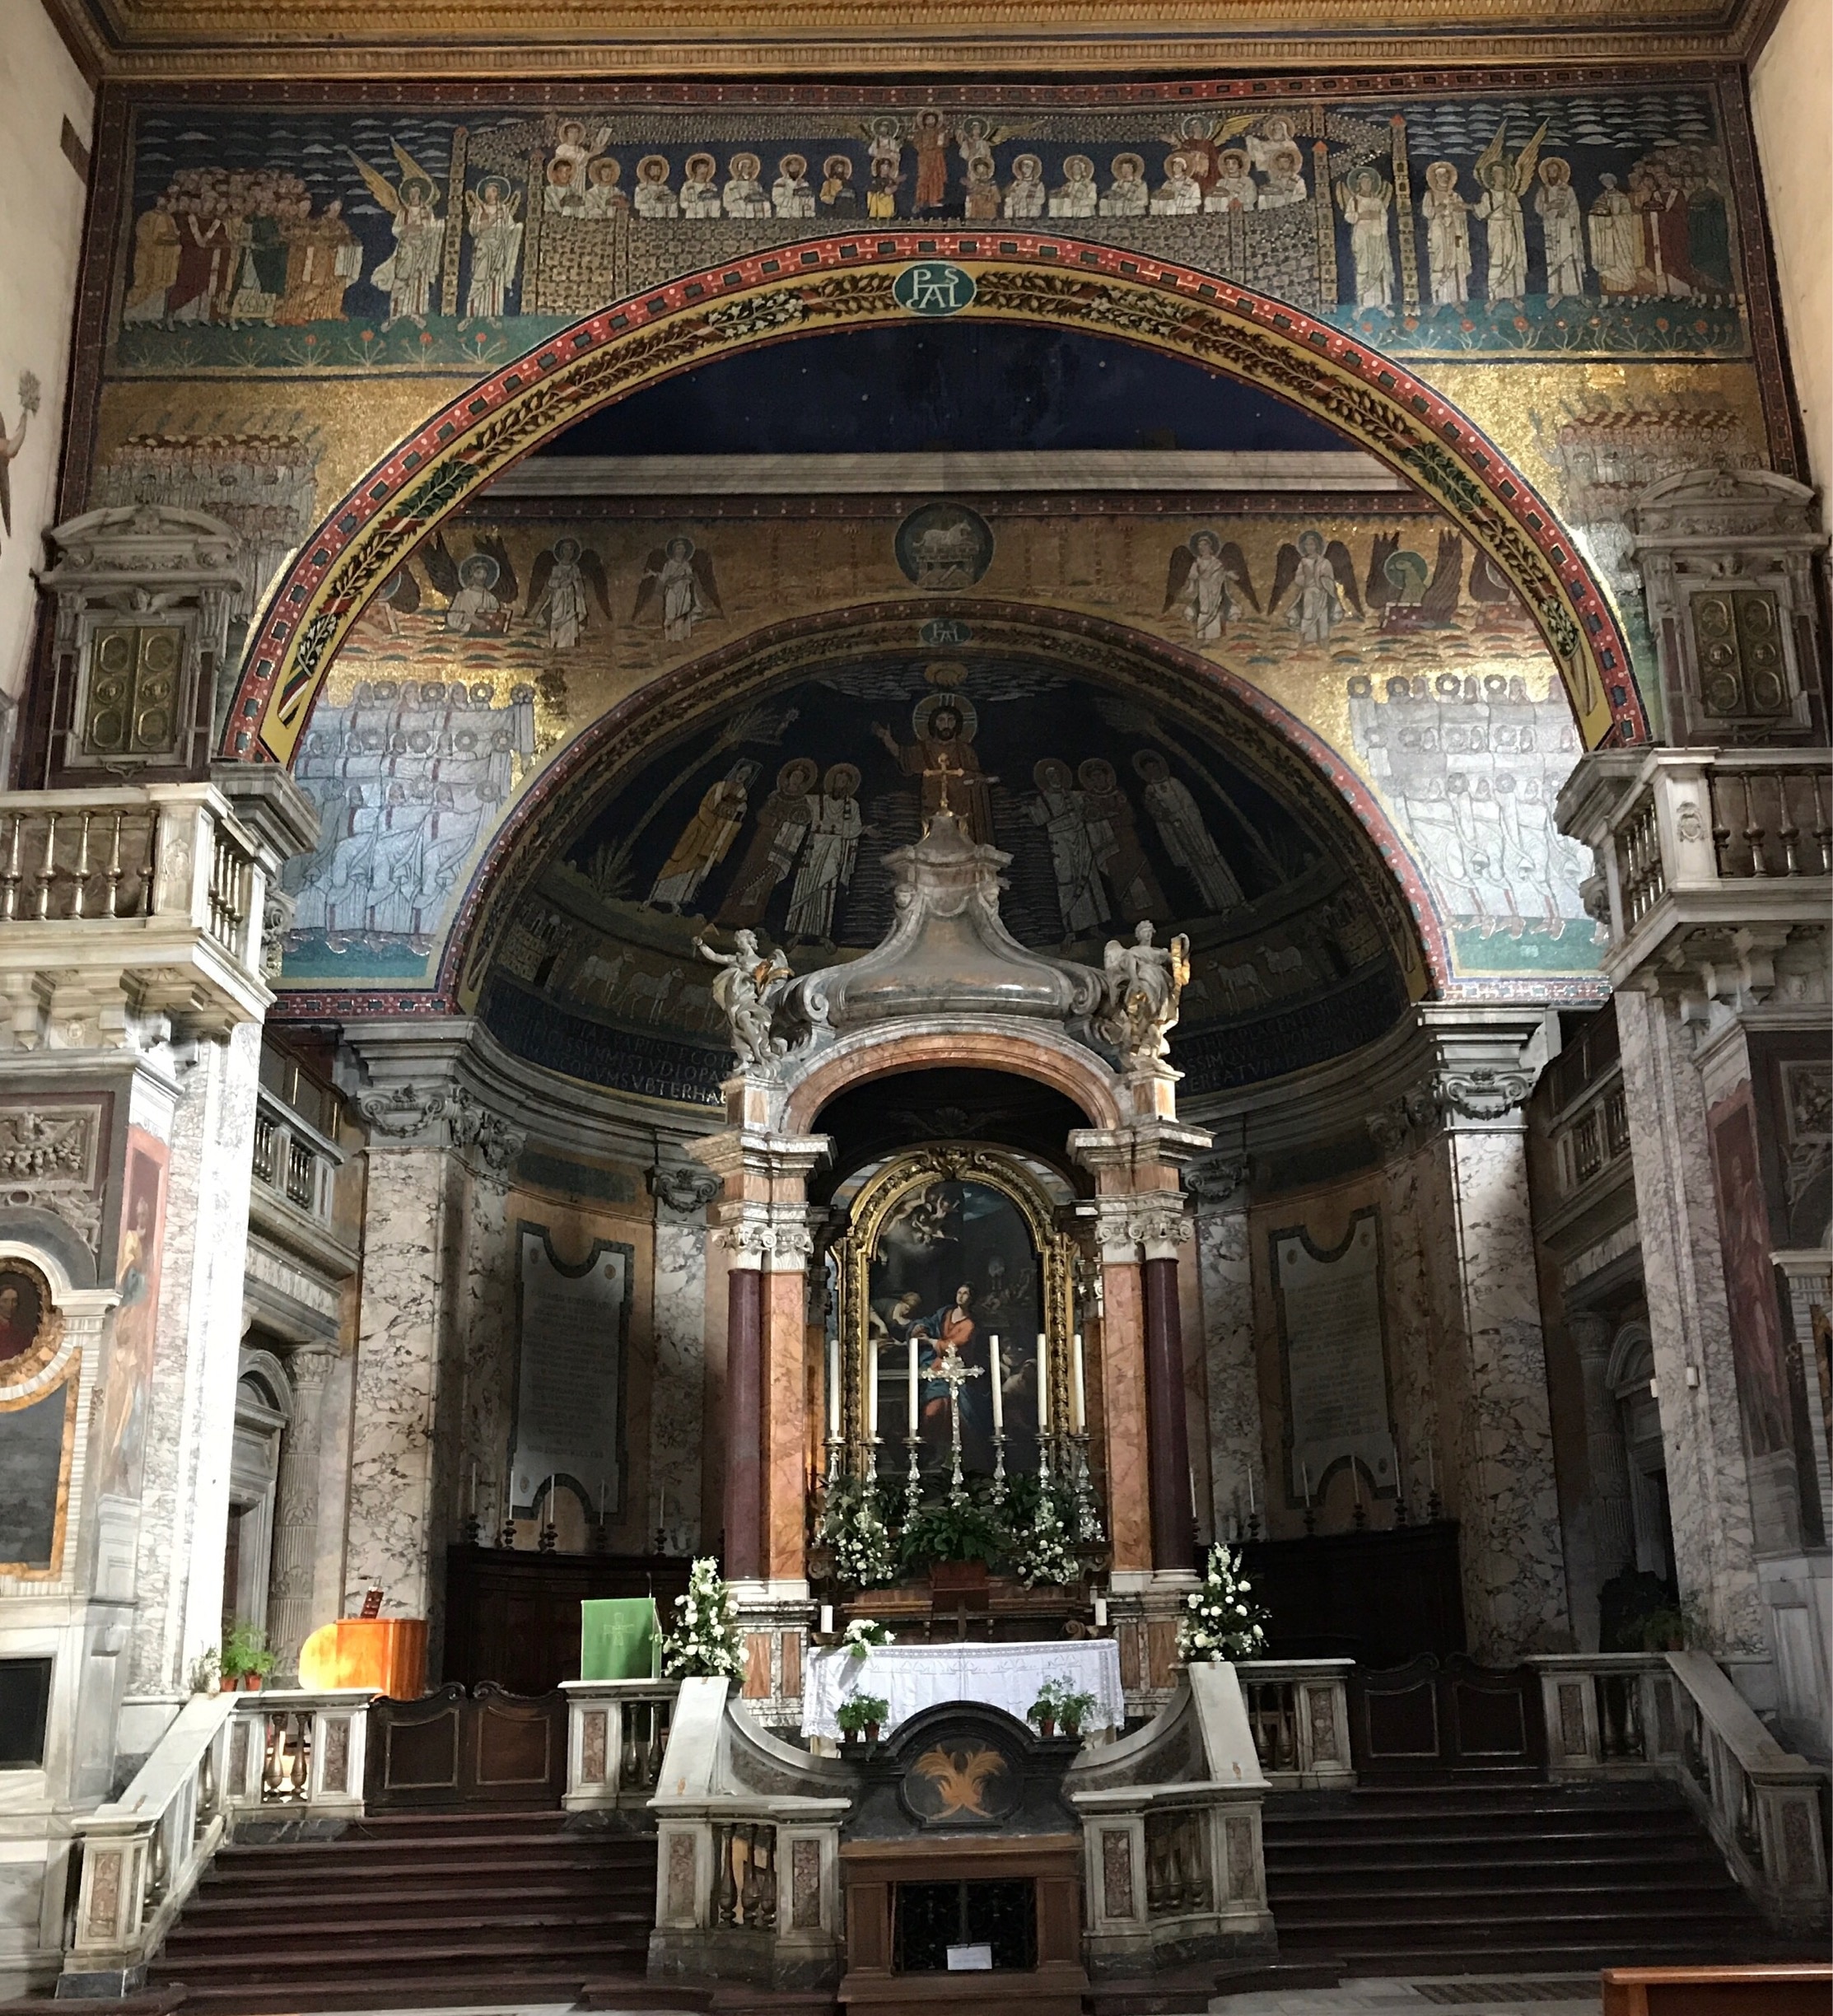 One of the oldest churches in Rome with wonderful mosaics!